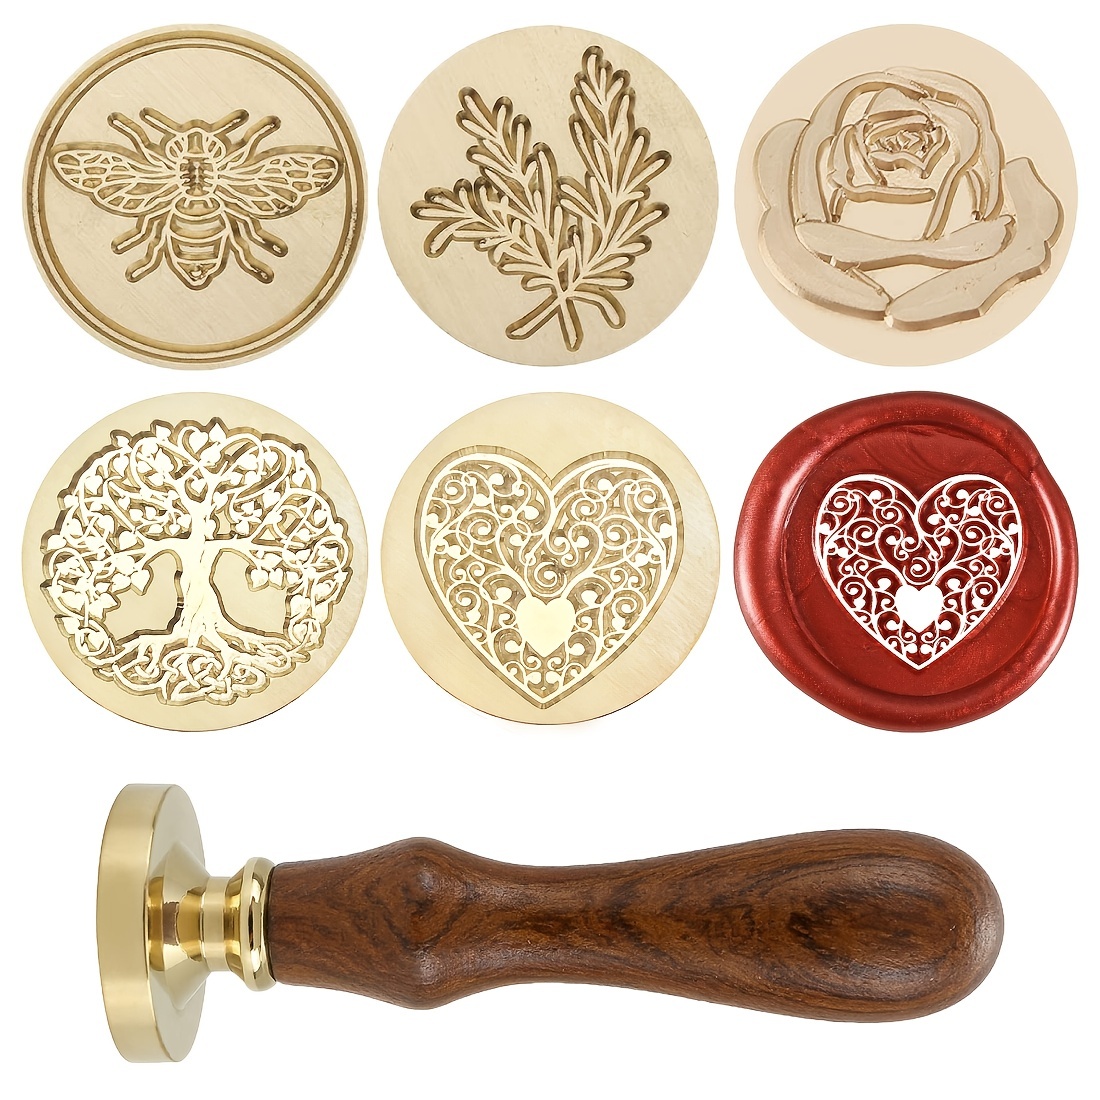 Wax Seal Stamp, Yoption Classic Irises Alphabet A Seal Wax Stamp, Vintage Retro Brass Head Wooden Handle Letter A Sealing Wax Seal Stamp (A)